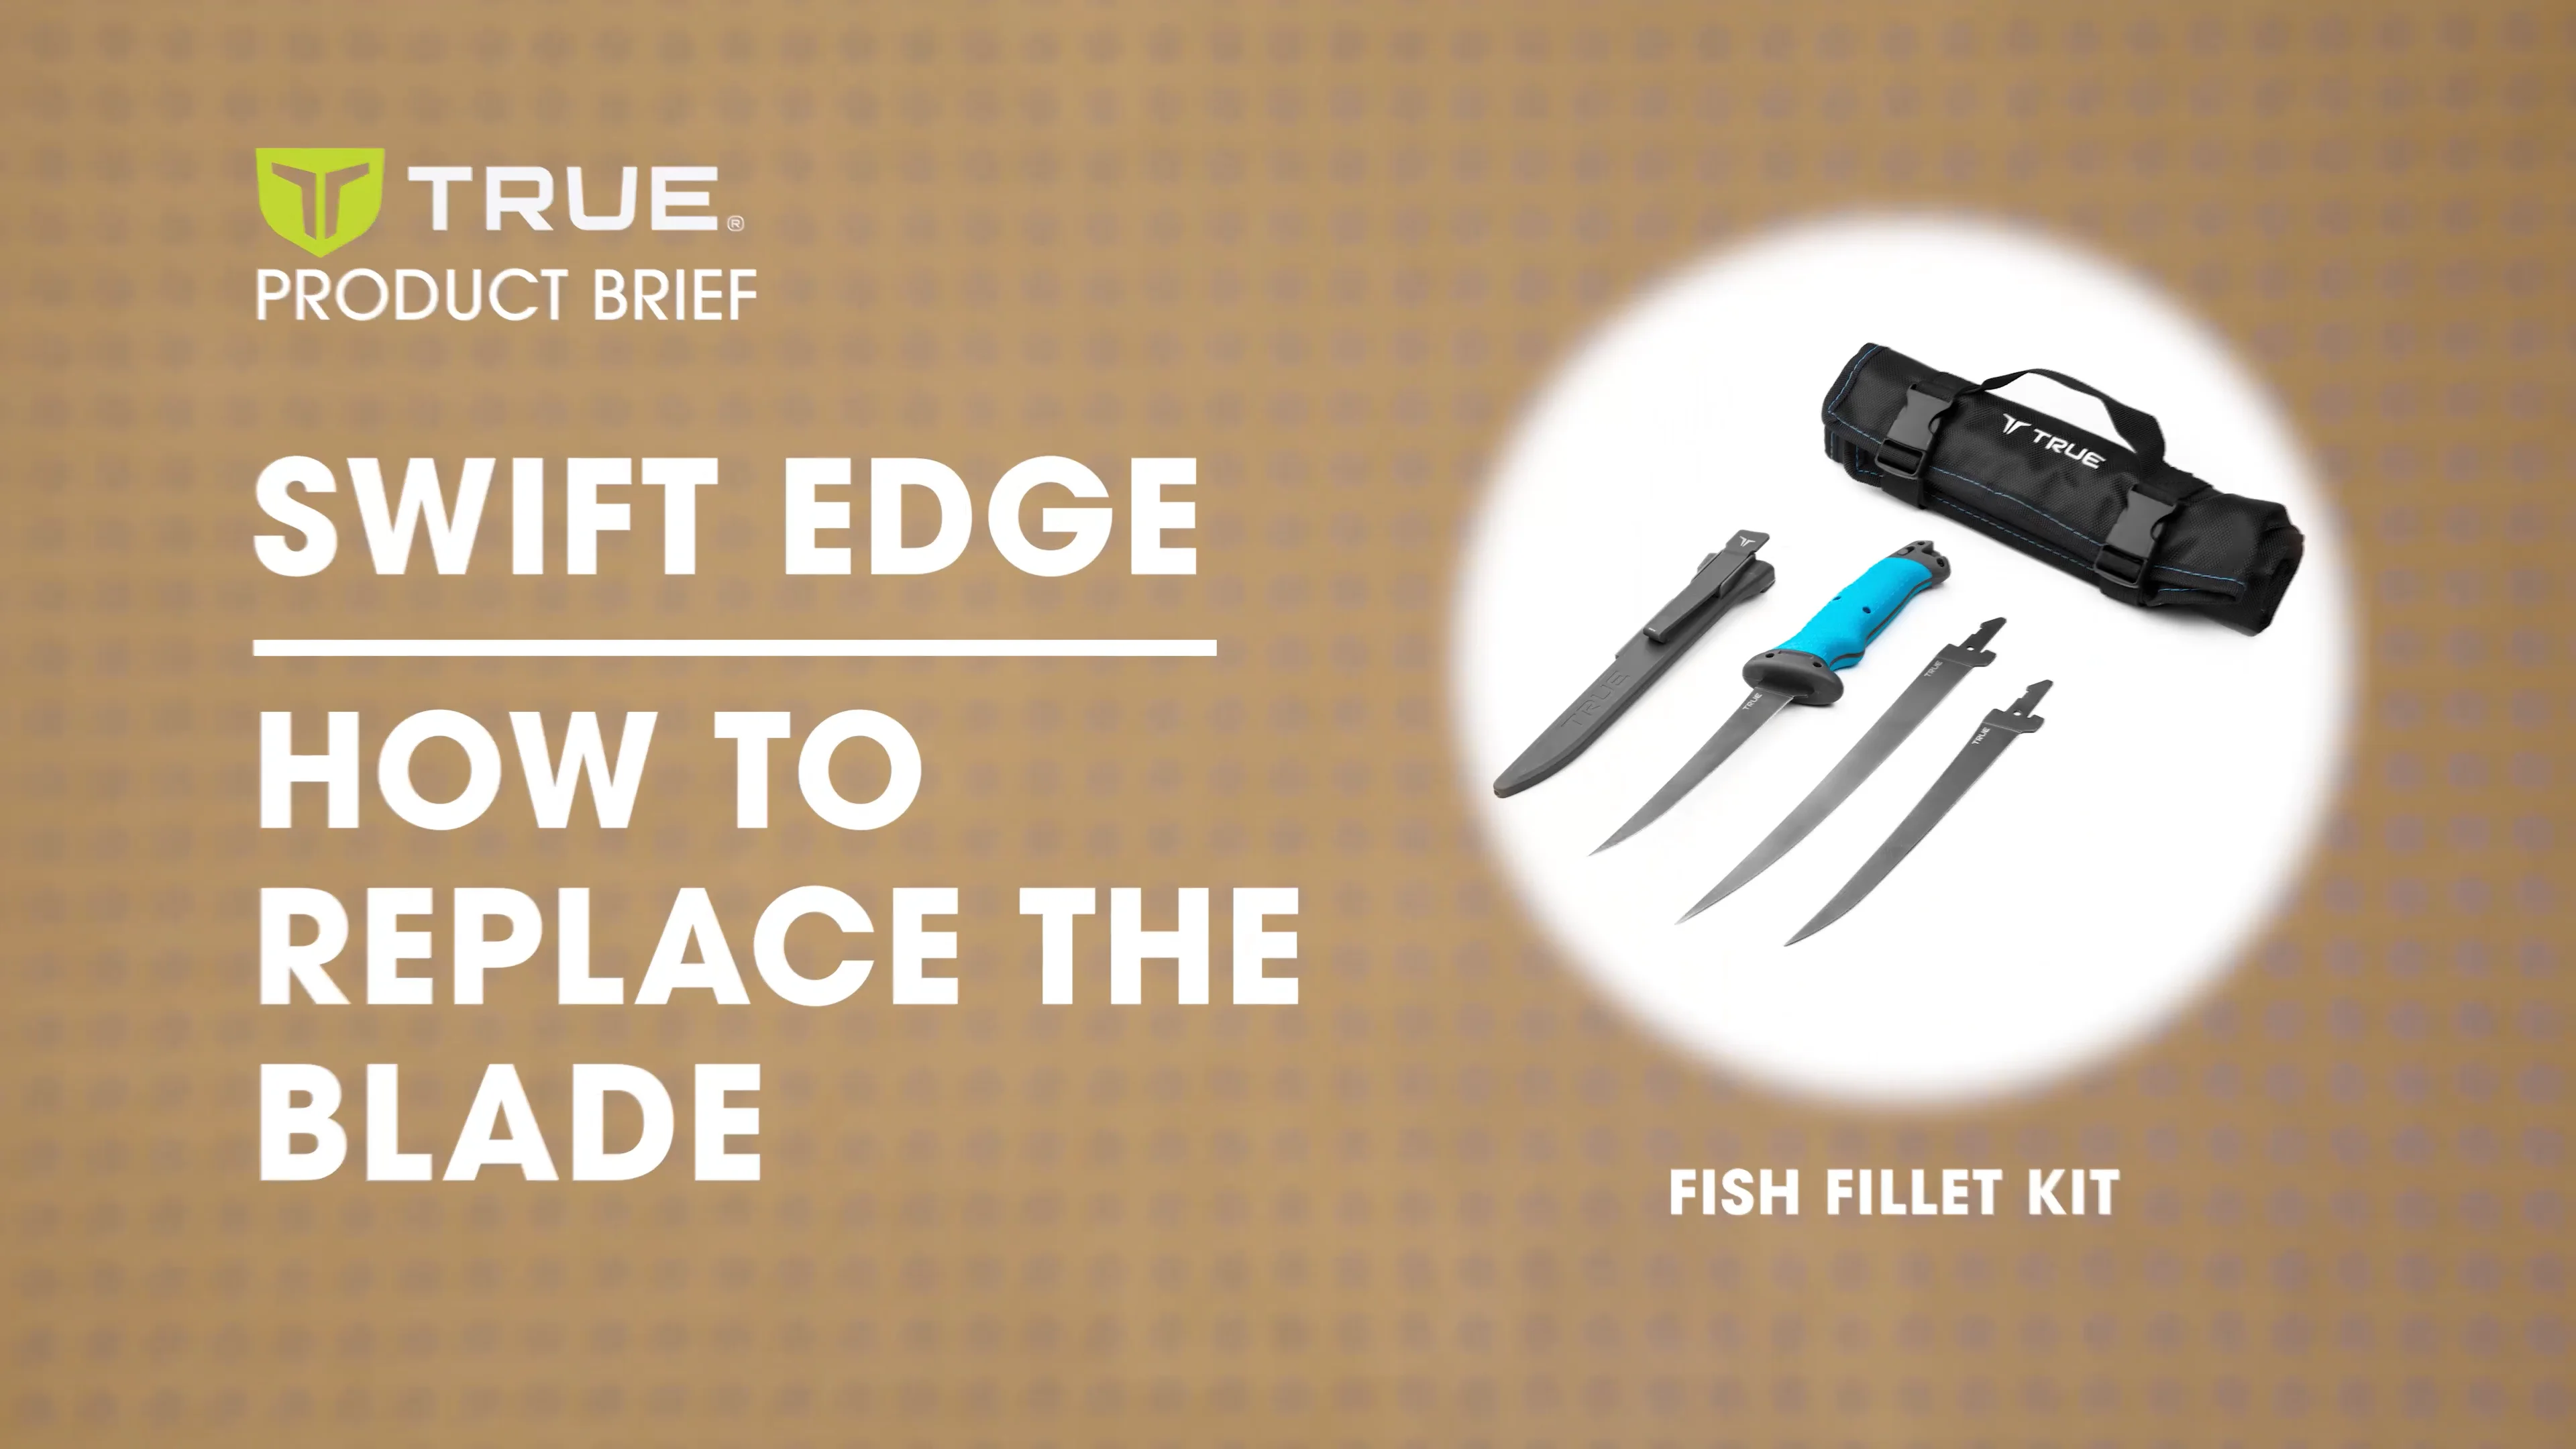 How to replace a TRUE SWIFT EDGE blade - Fish Fillet Kit (TRU-FXK